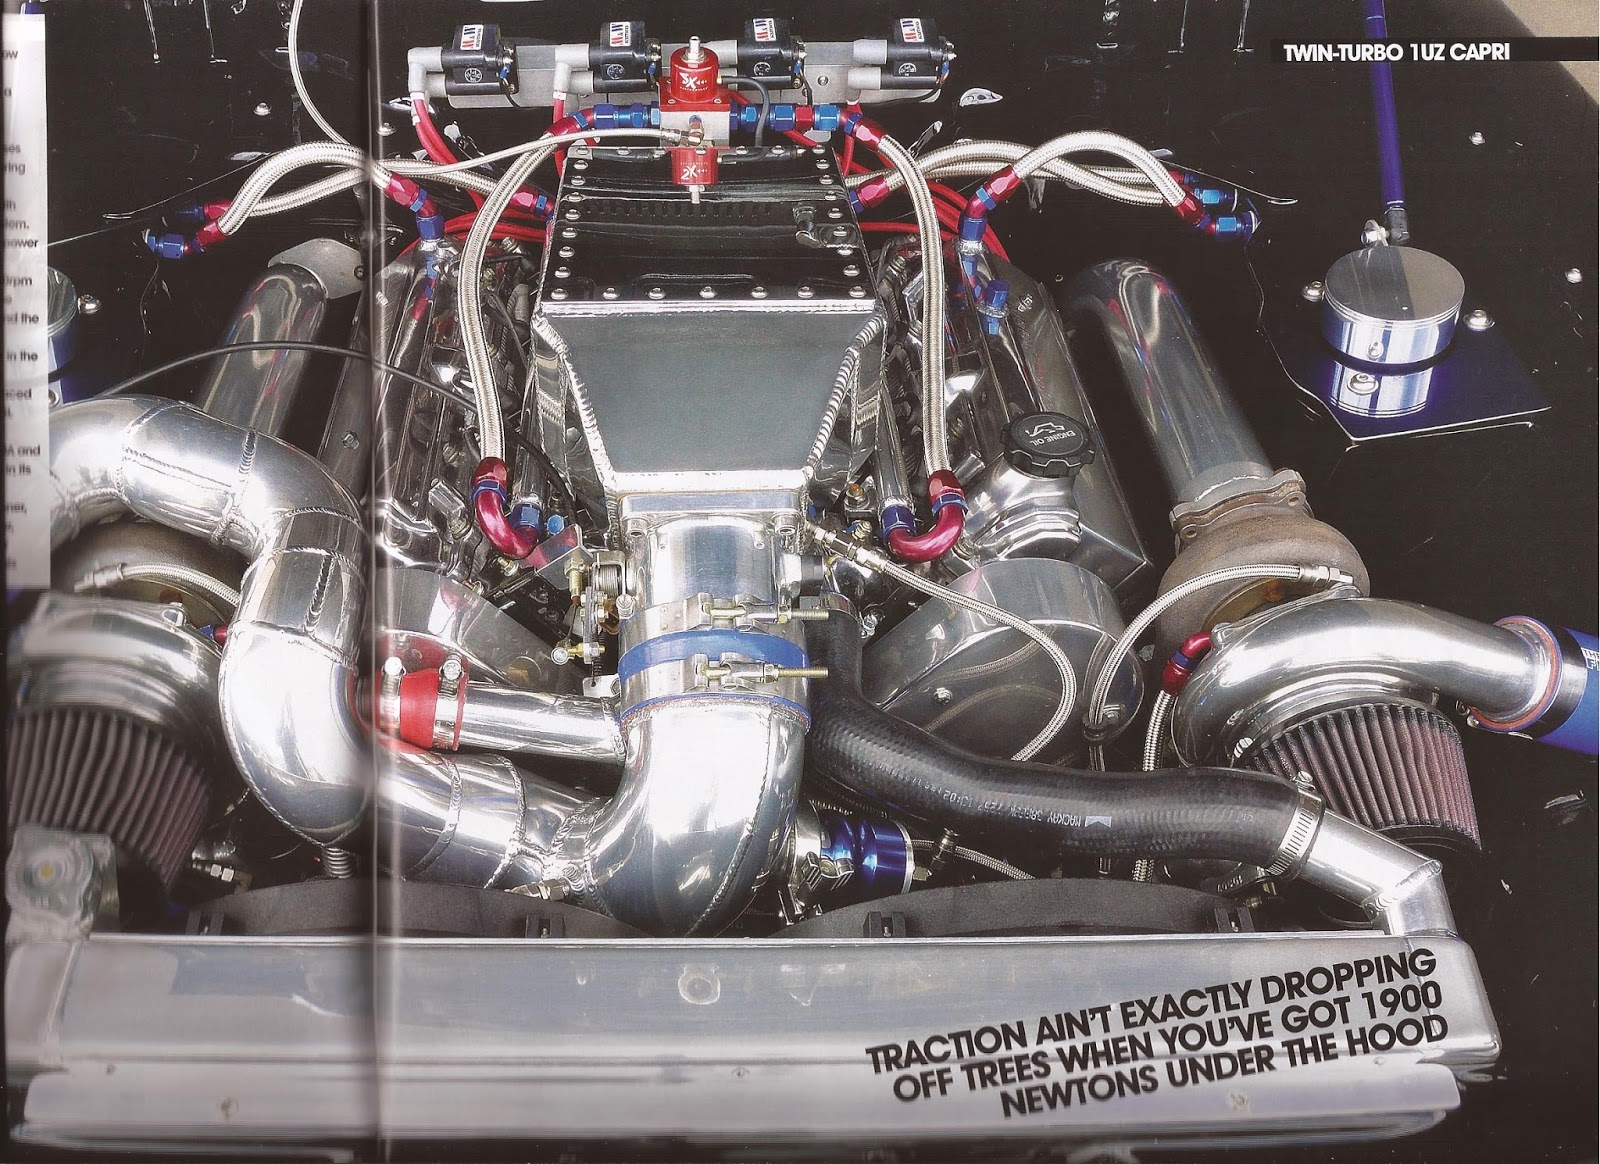 The engine is a Lexus 1UZ -FE with twin turbos. 